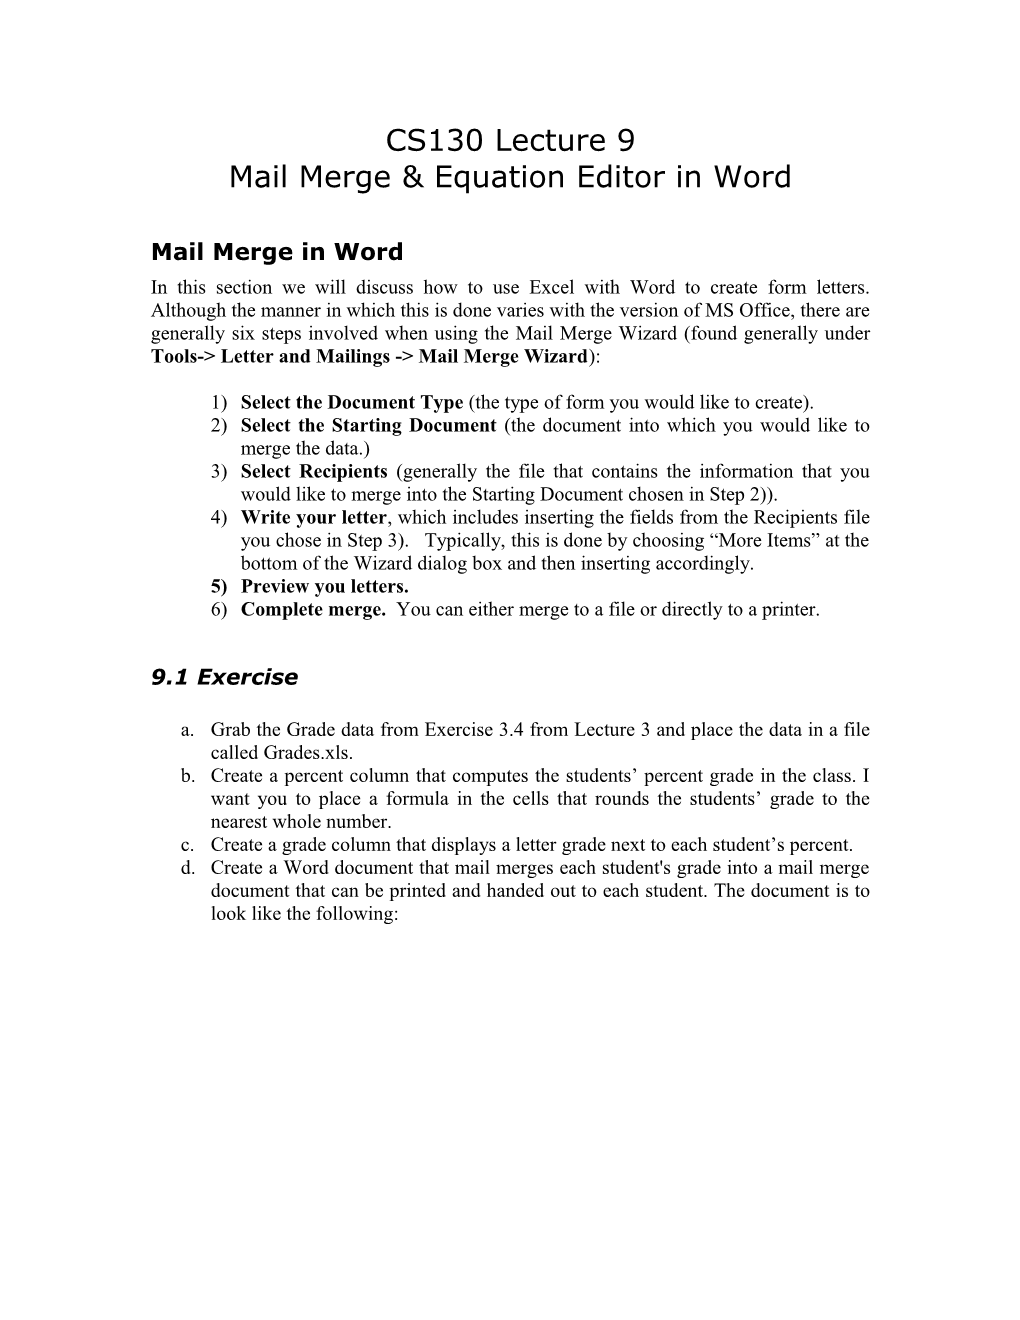 Mail Merge & Equation Editor in Word